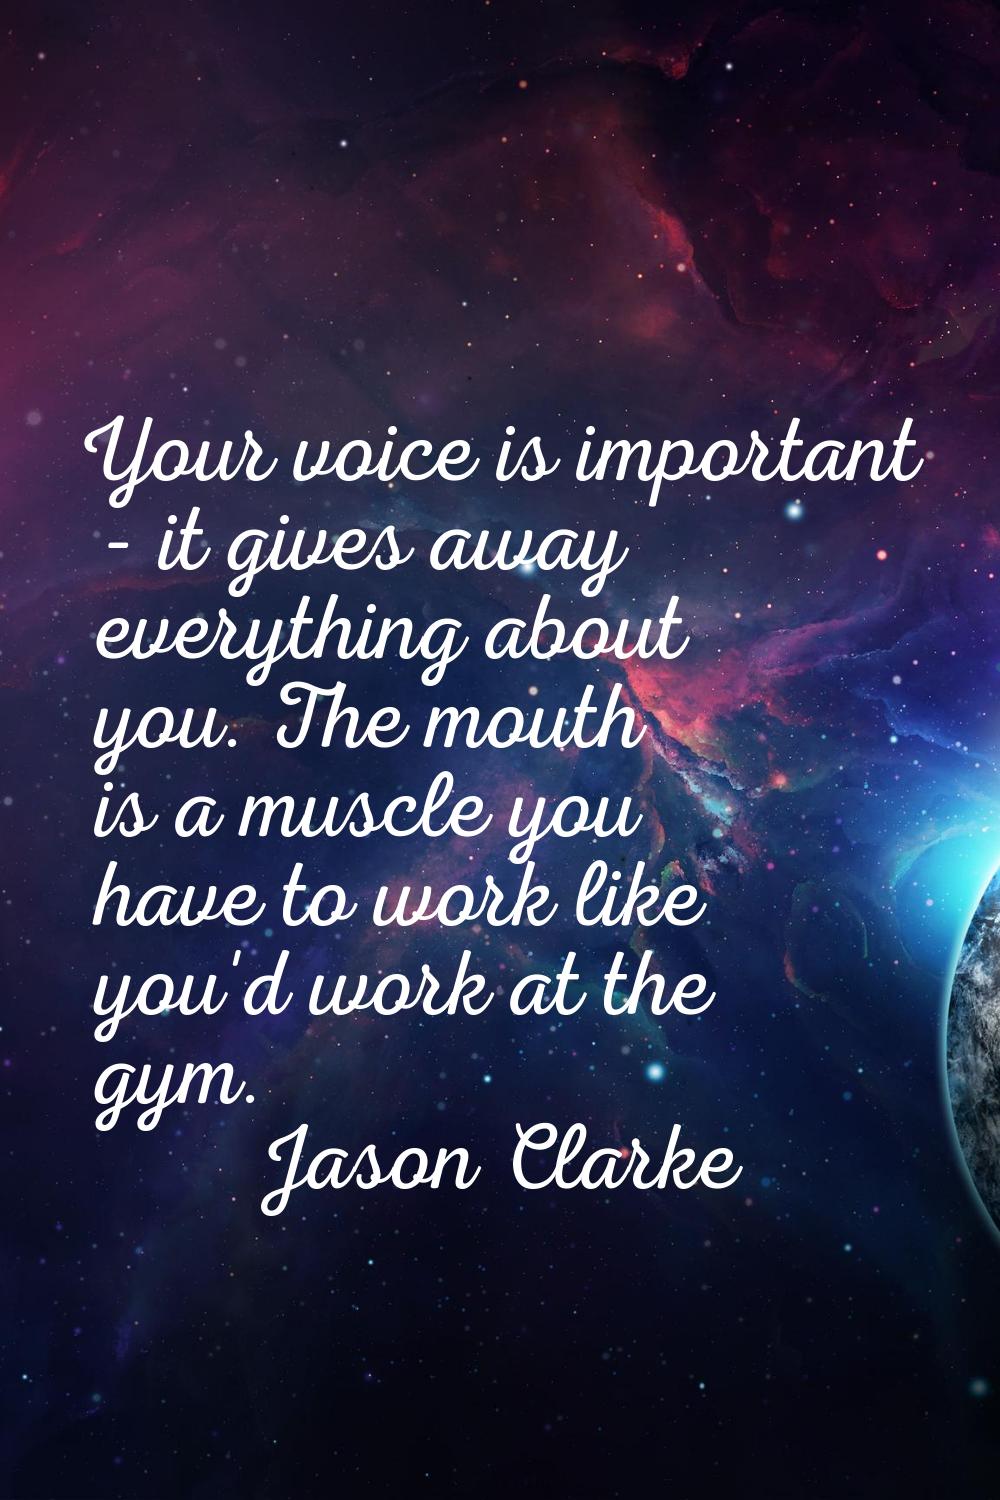 Your voice is important - it gives away everything about you. The mouth is a muscle you have to wor